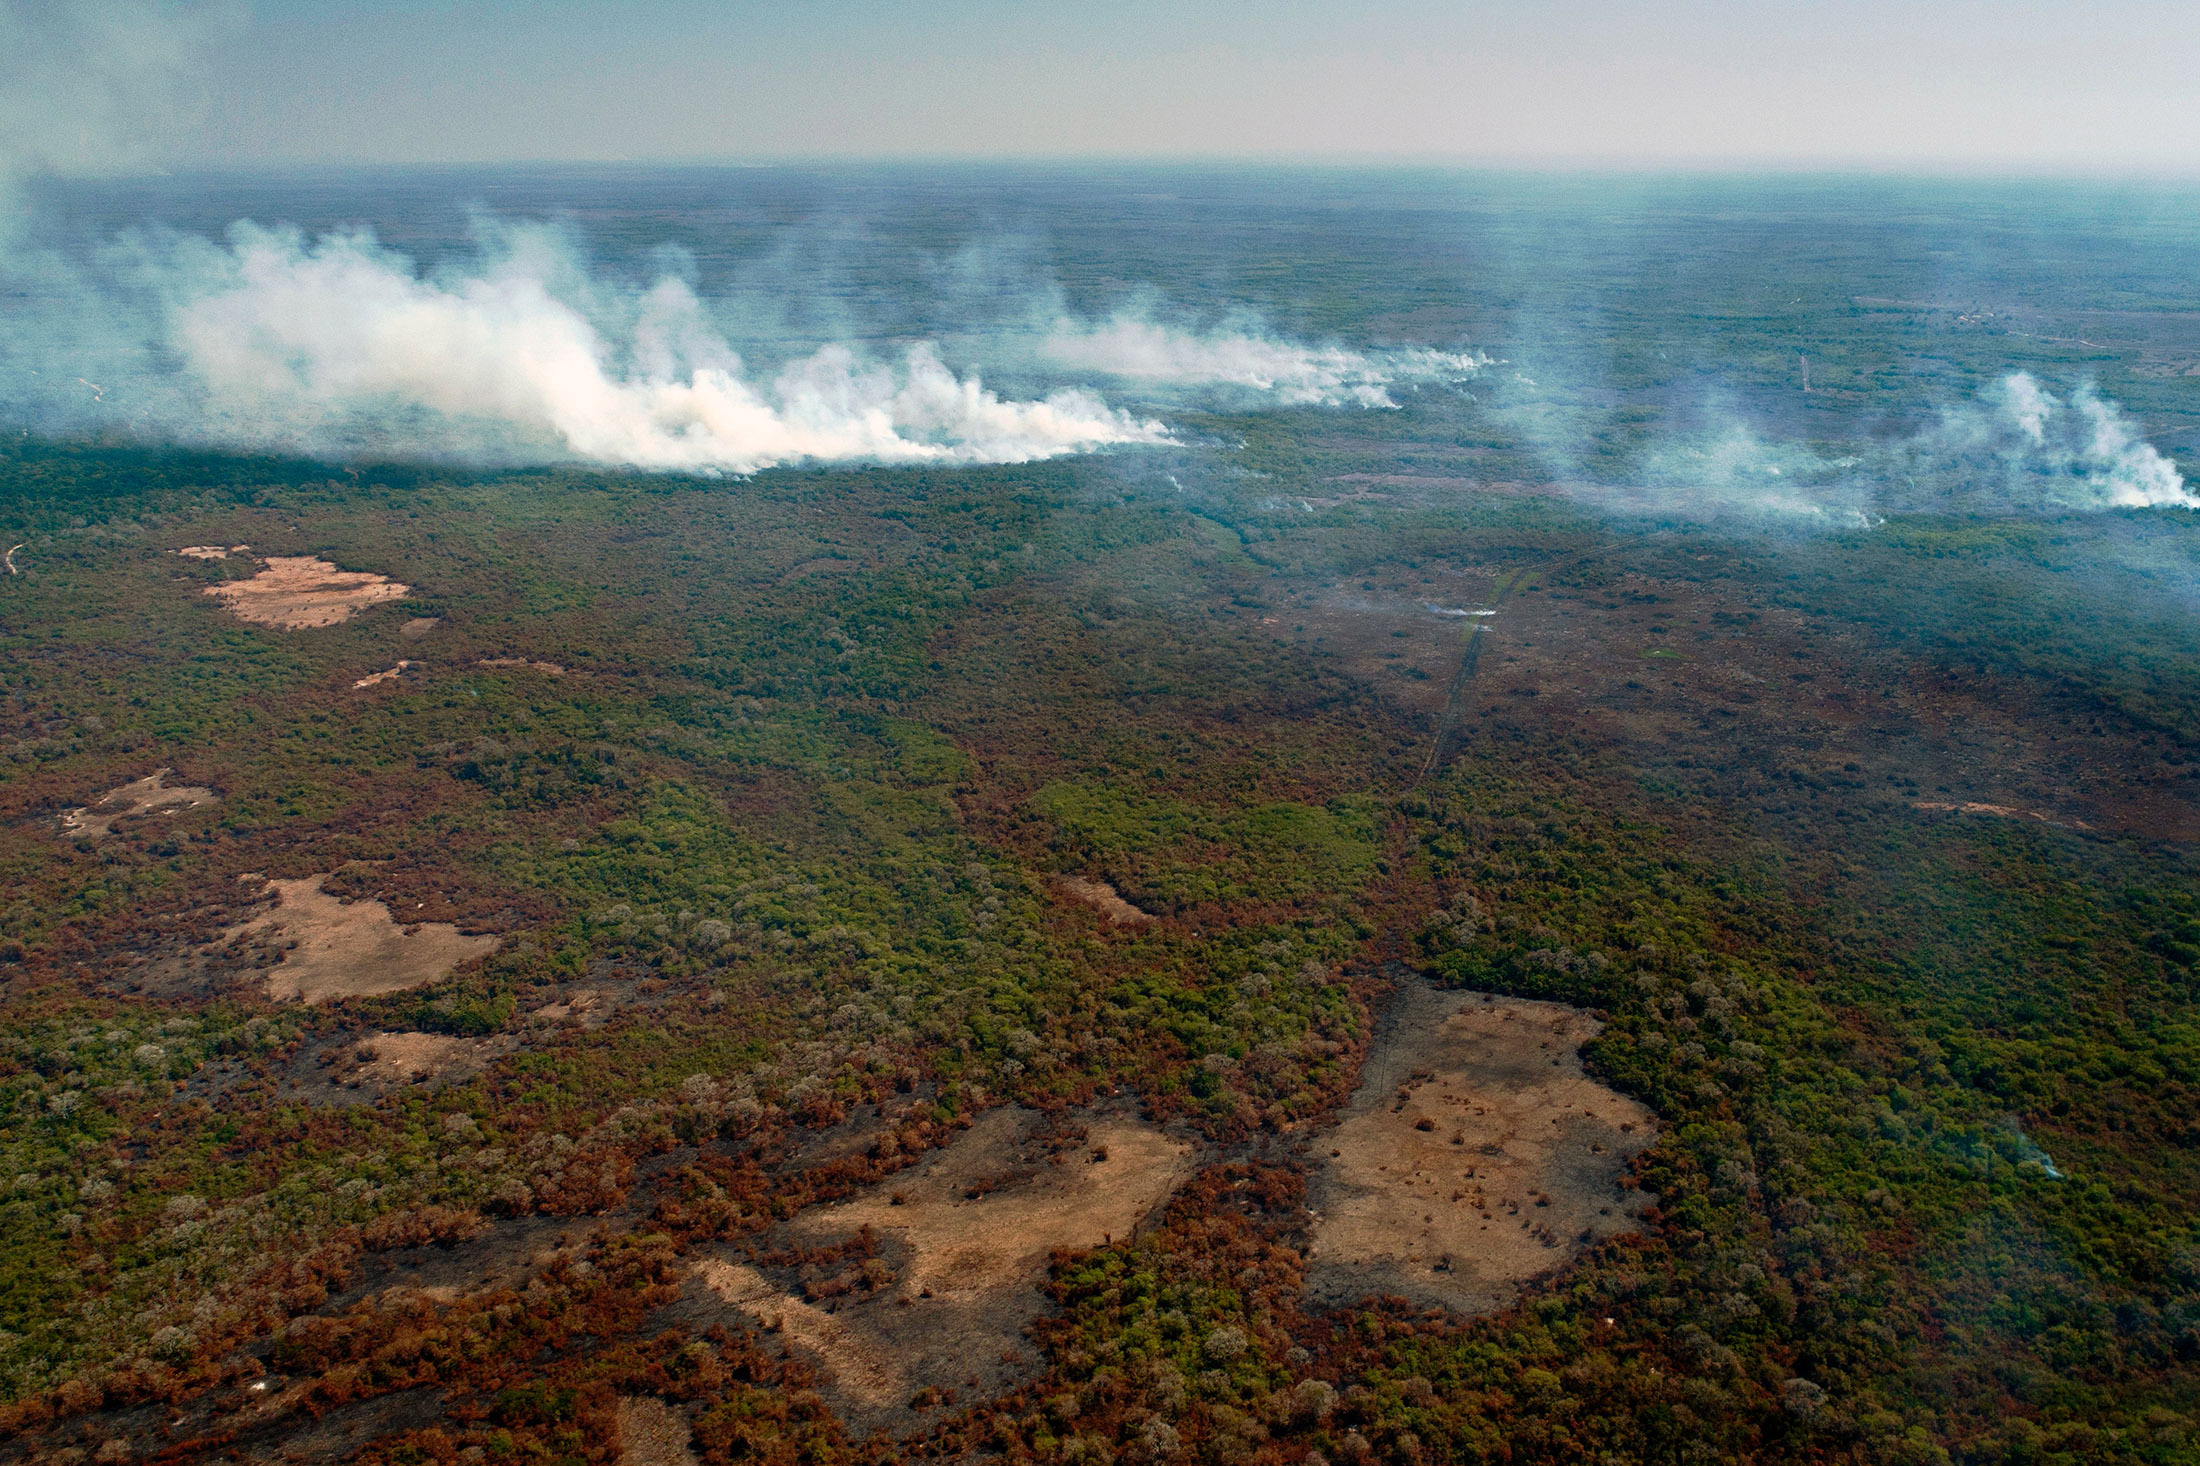 Fires burn in the Pantanal region of Mato Grosso State, Brazil on Aug. 1.